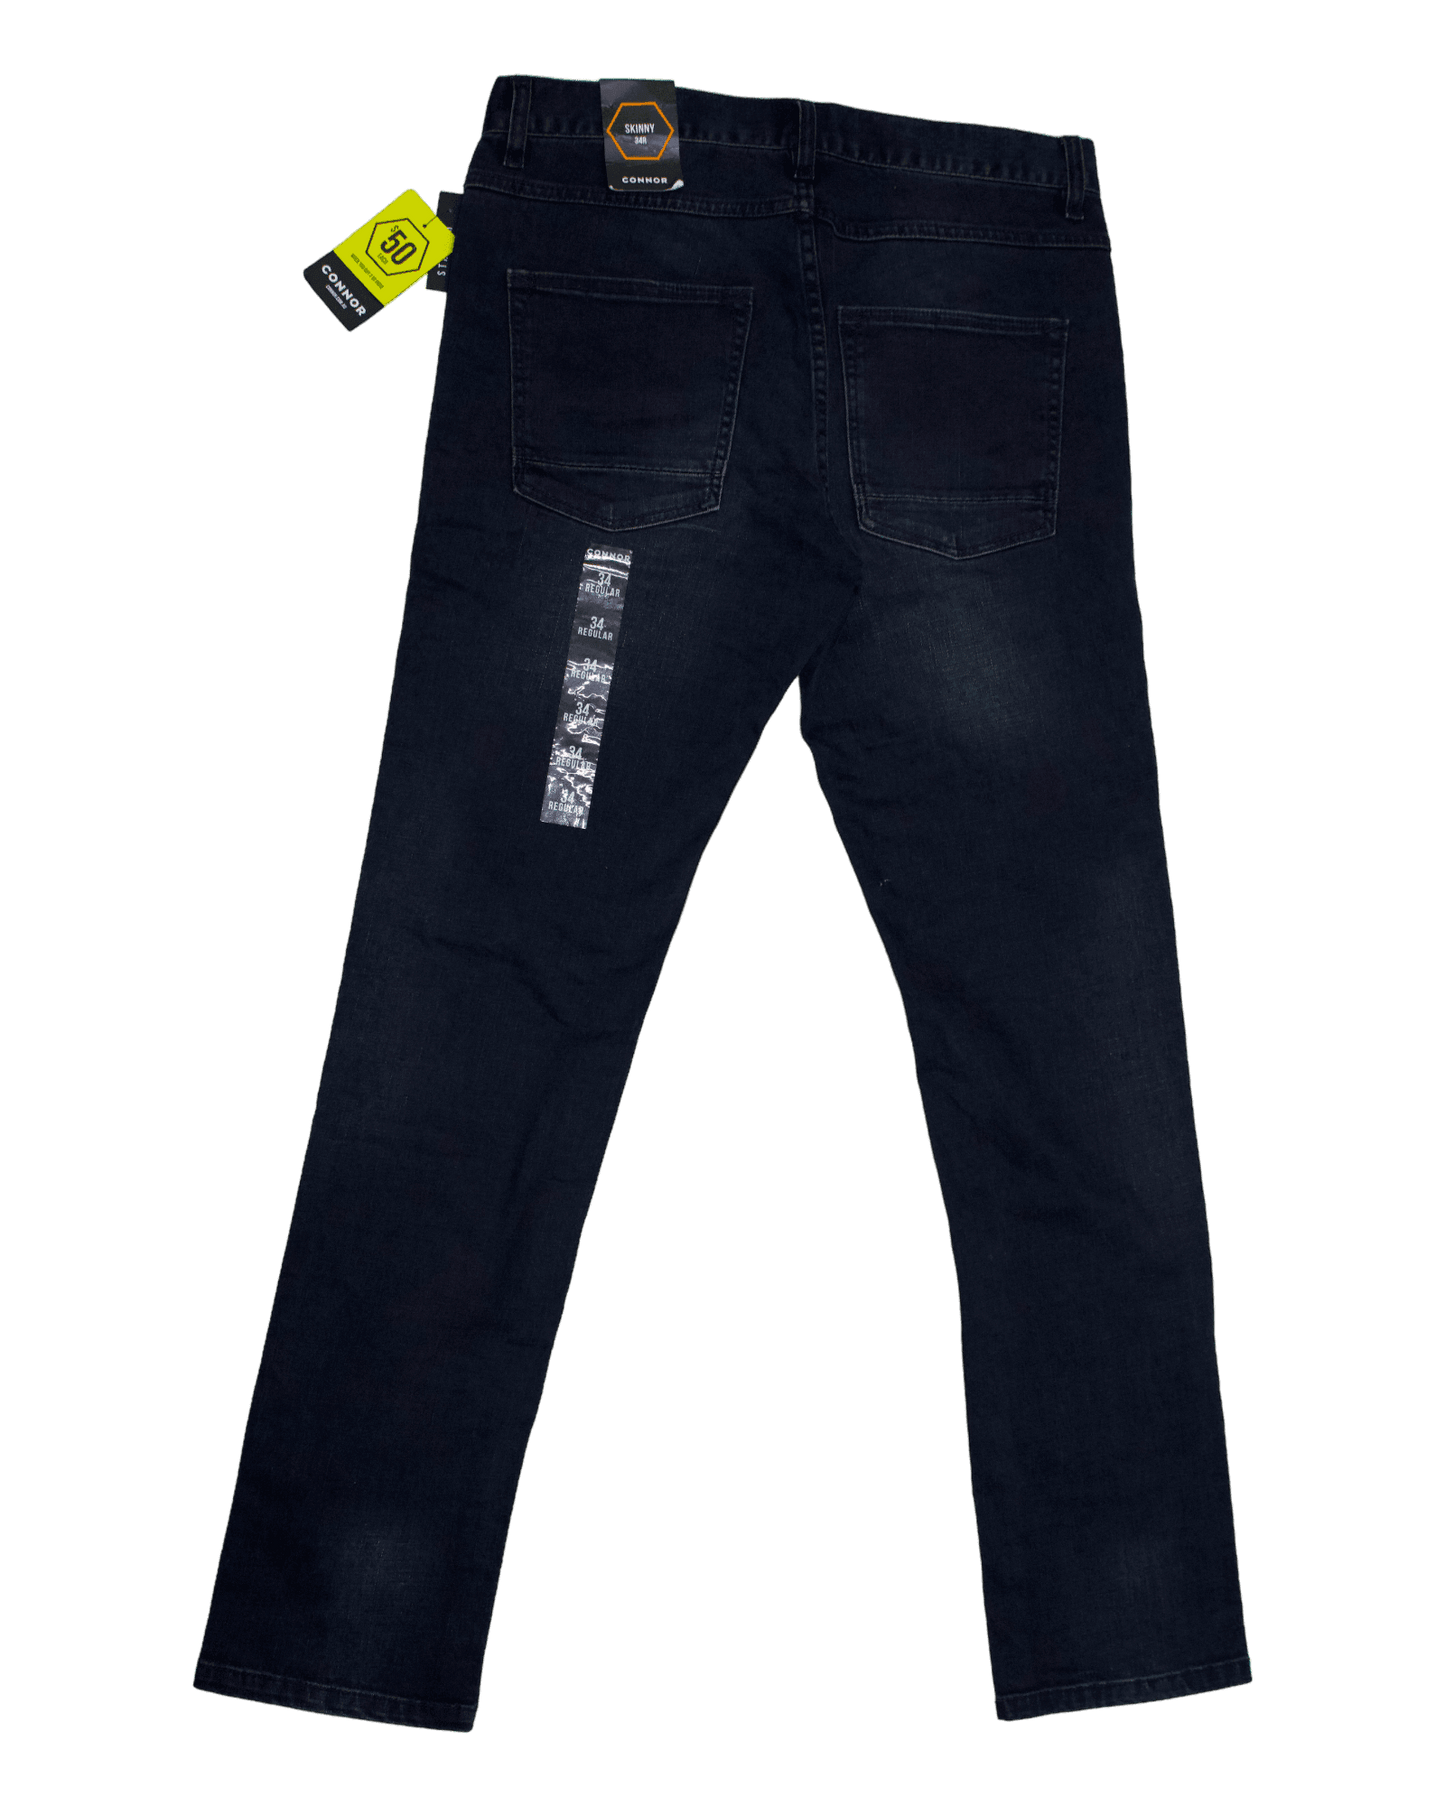 Connor Skinny Jeans for Men - Contemporary Style and Comfort - Apparel For Less